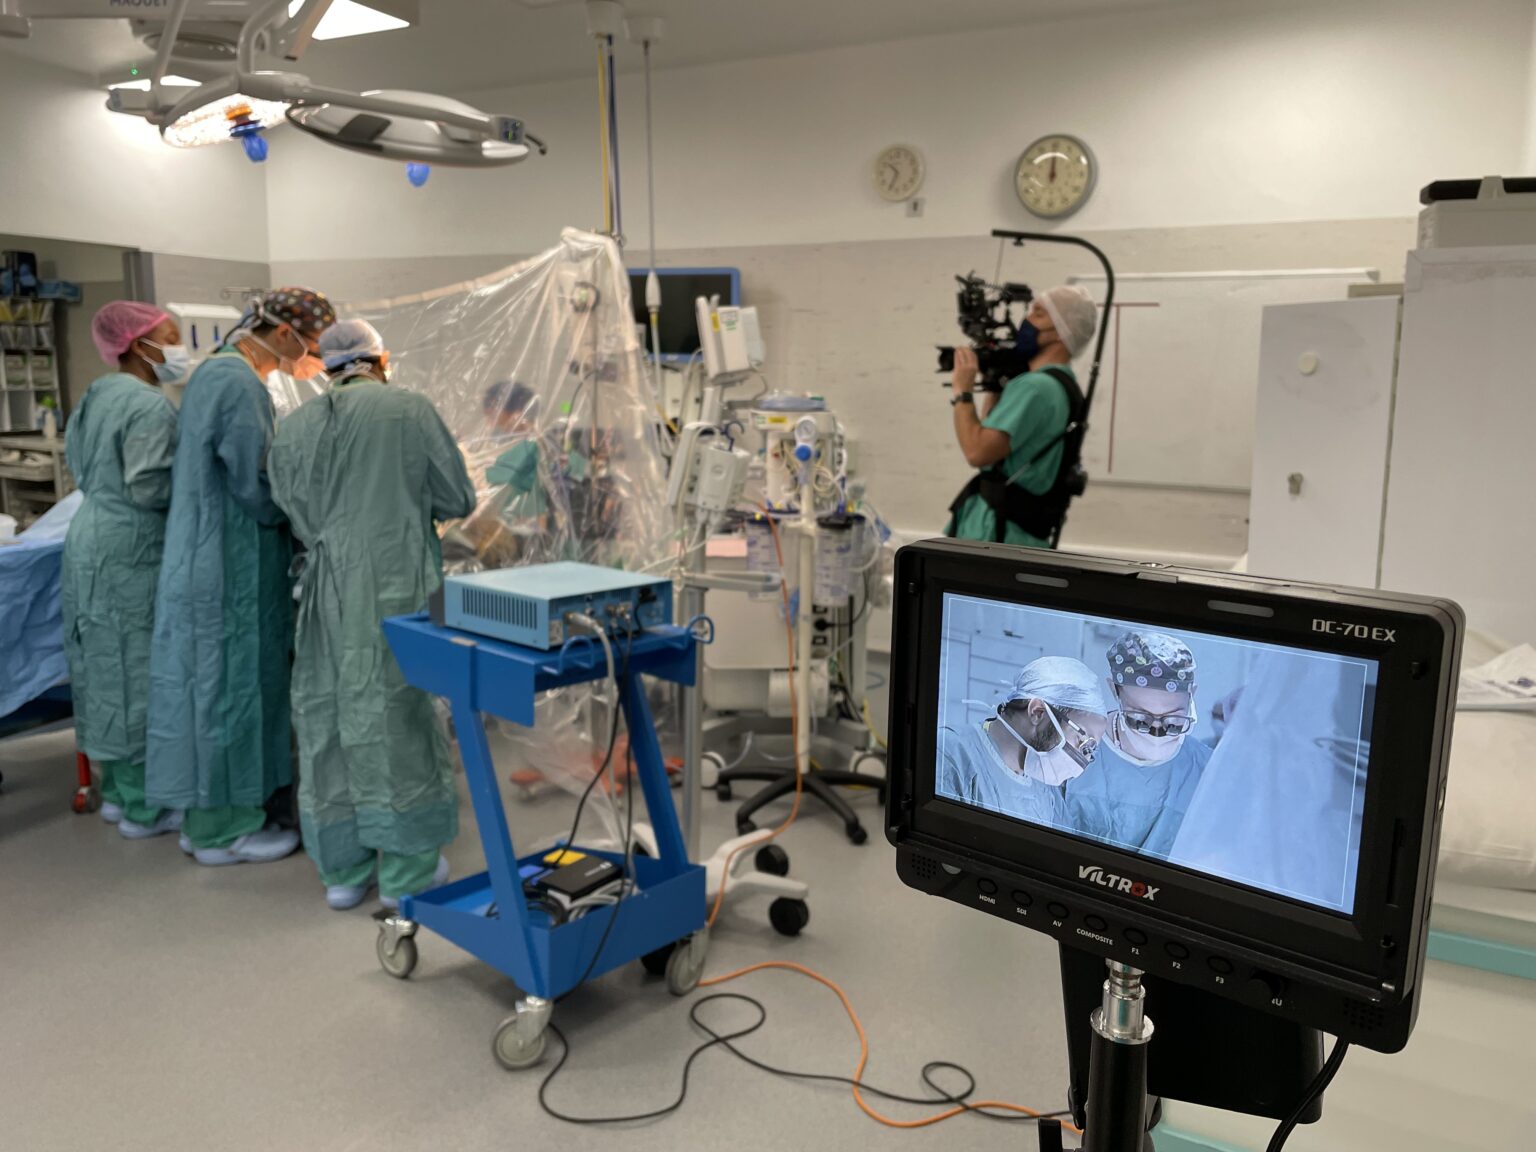 Behind the scenes - operating room